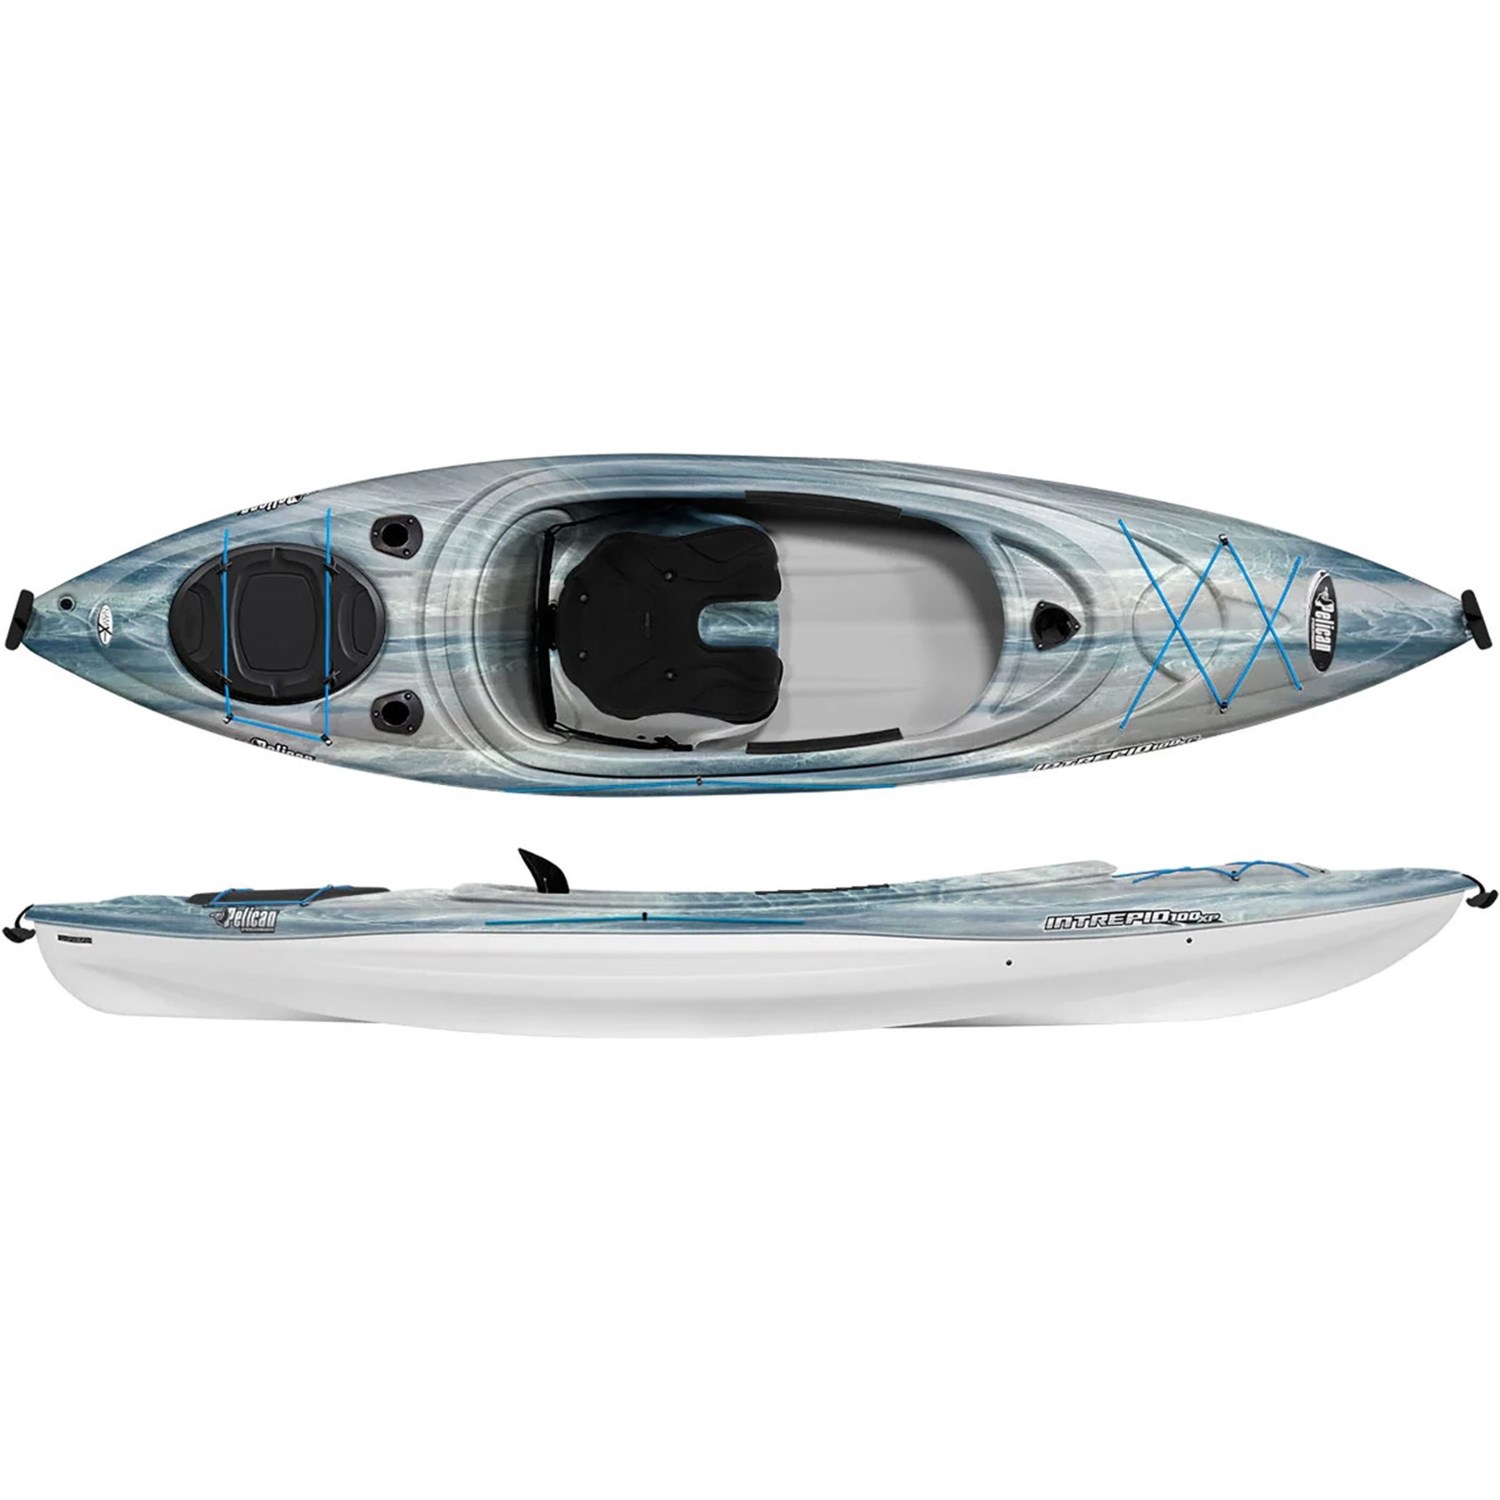 PELICAN Intrepid 100XP Fishing Sit-In Kayak with Paddle - 10' - Save 23%